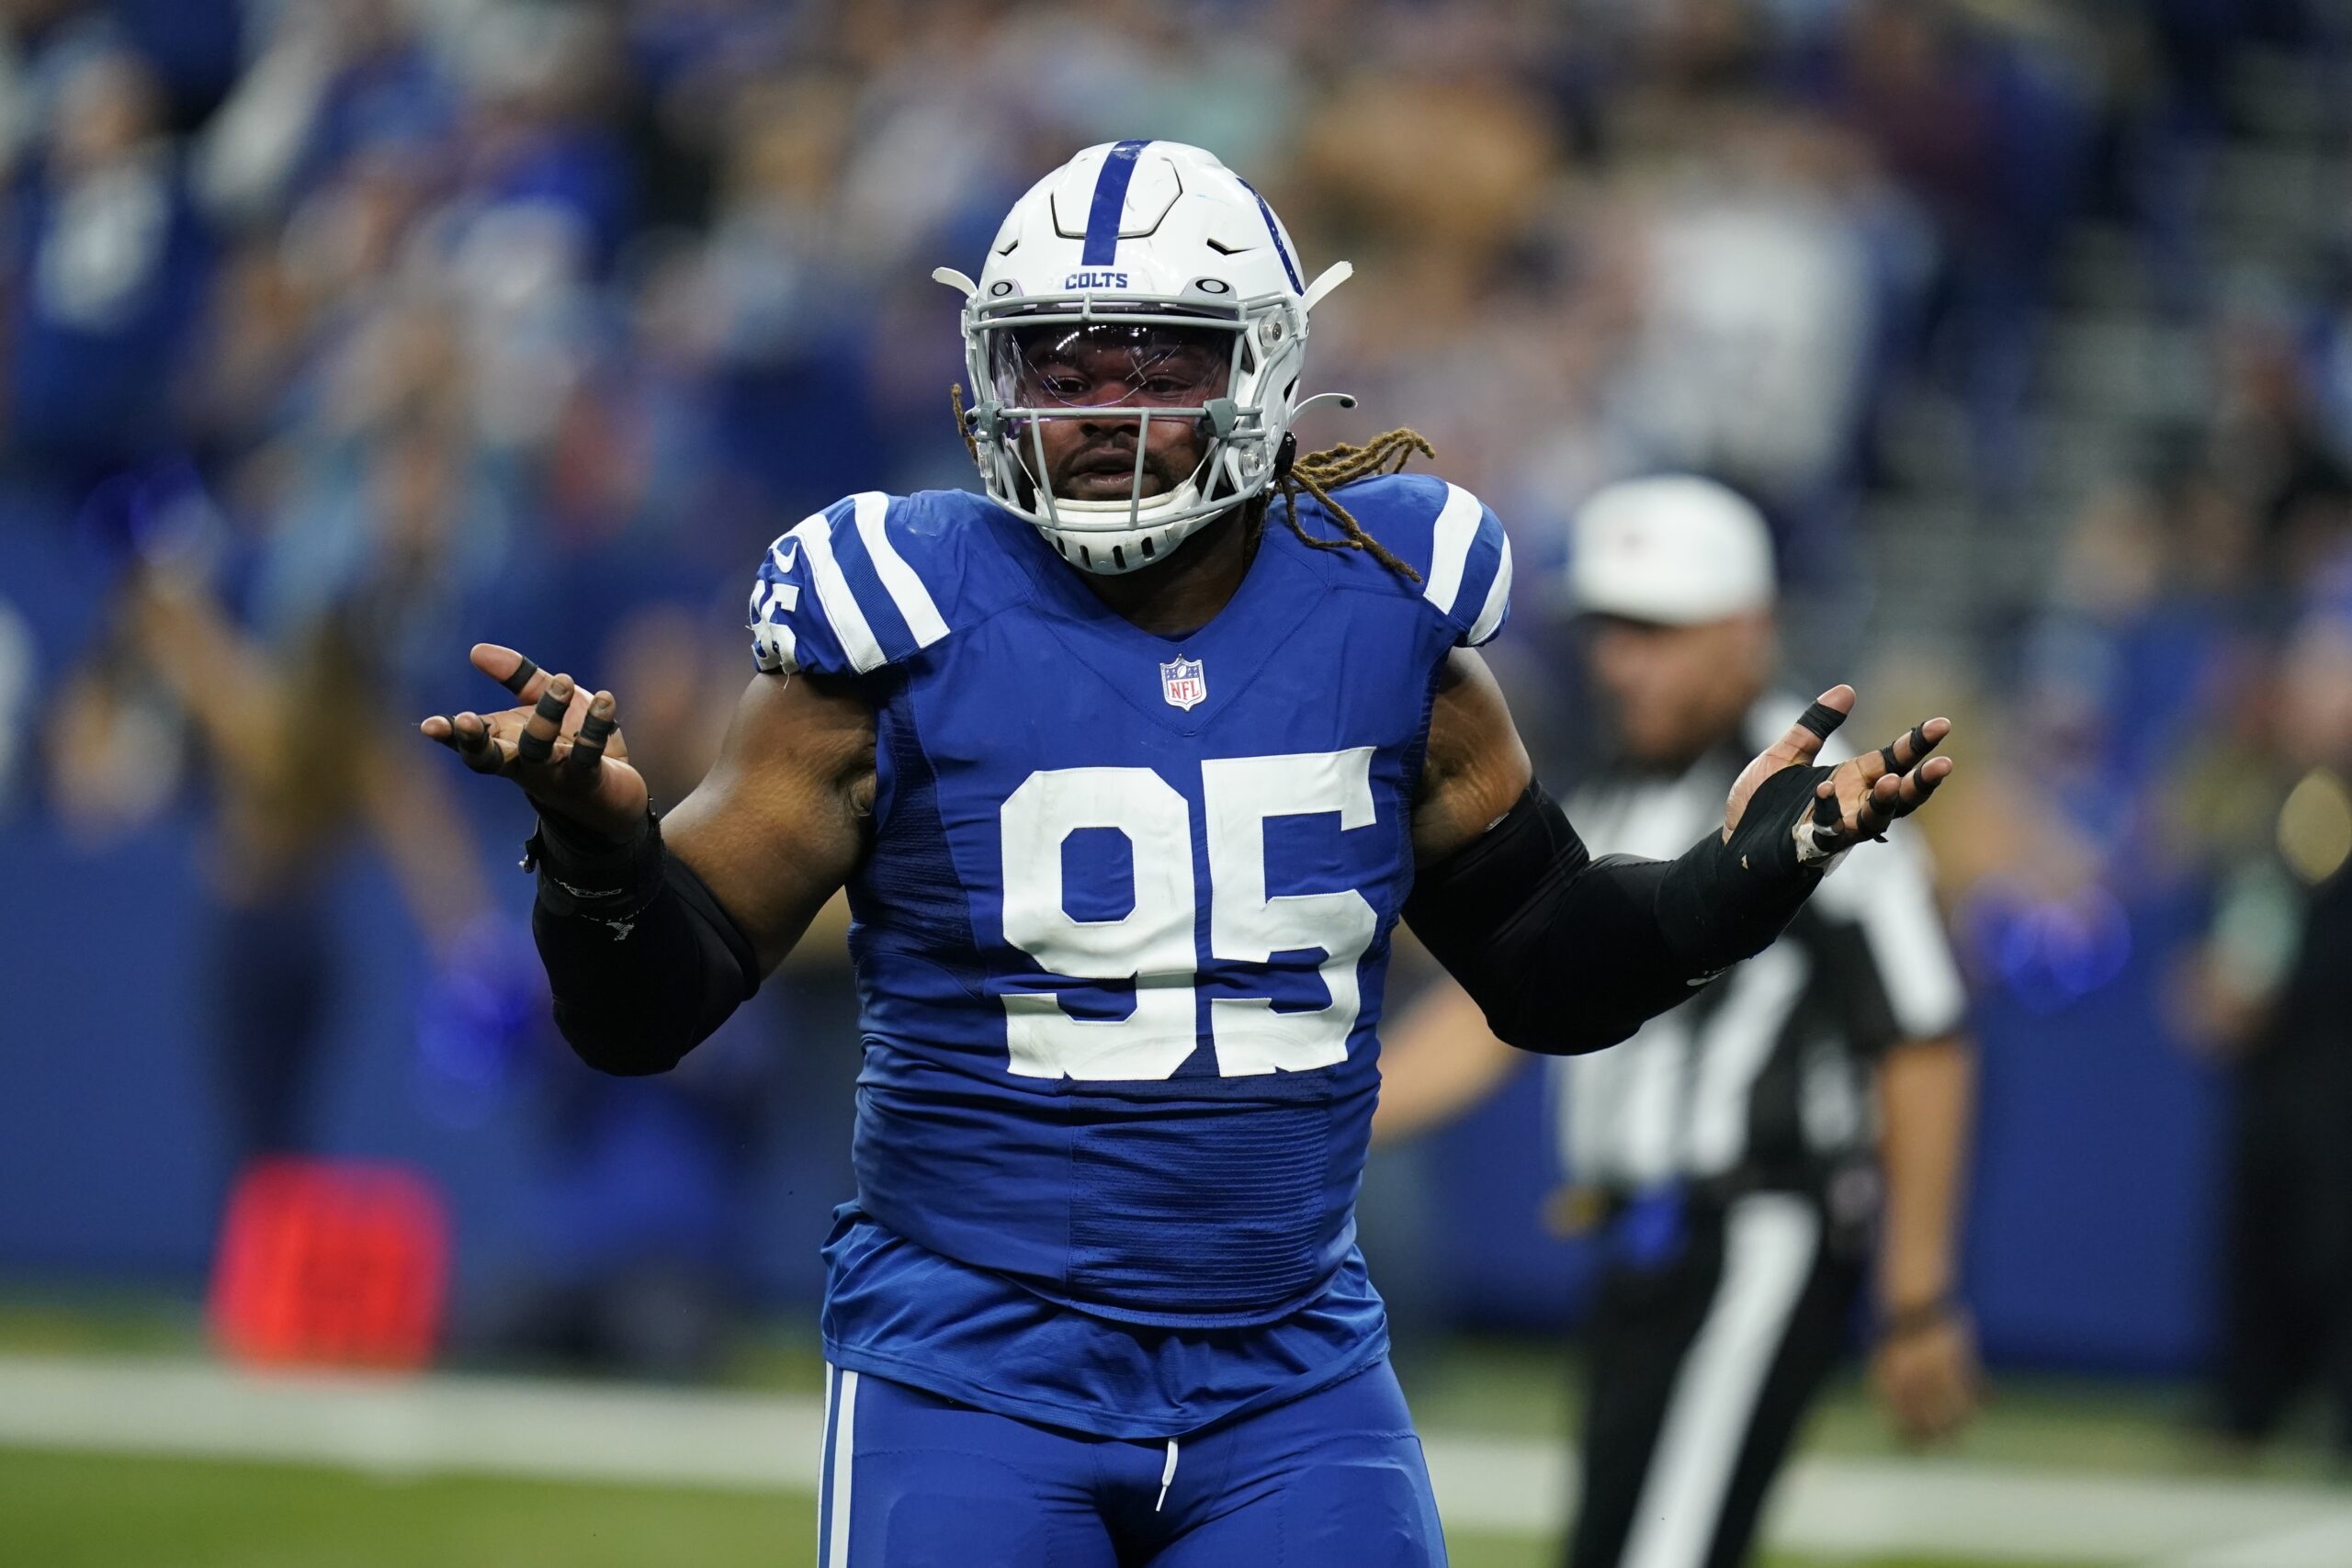 Colts free agent DT Taylor Stallworth signs with Chiefs